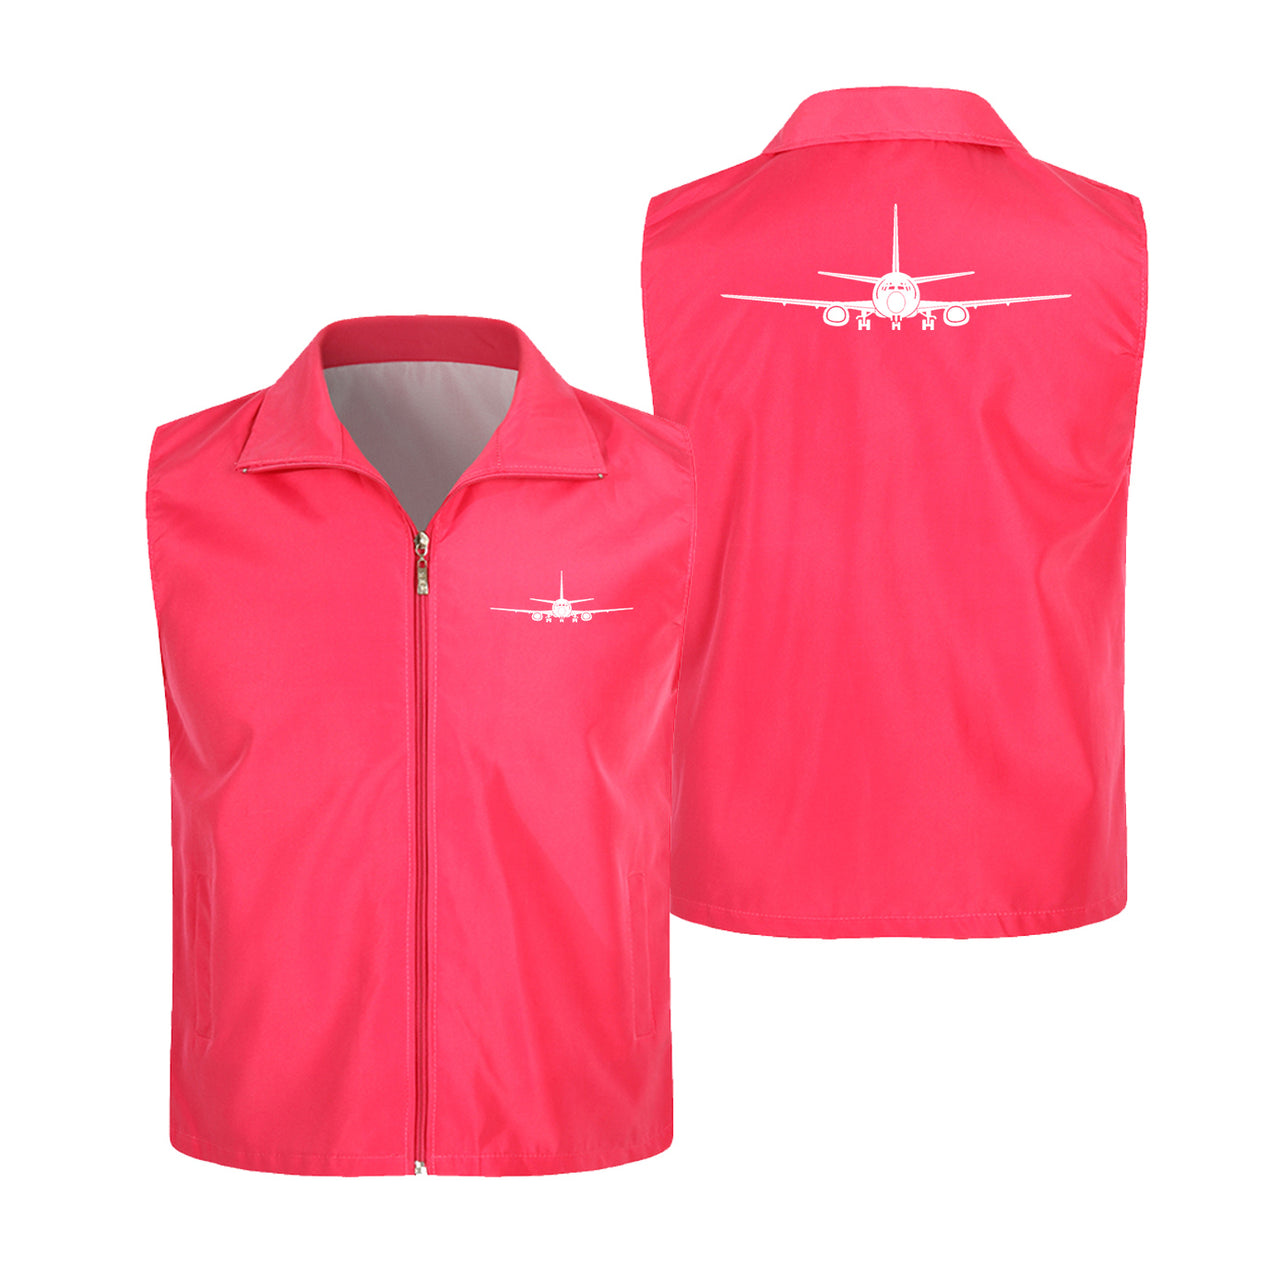 Boeing 737 Silhouette Designed Thin Style Vests